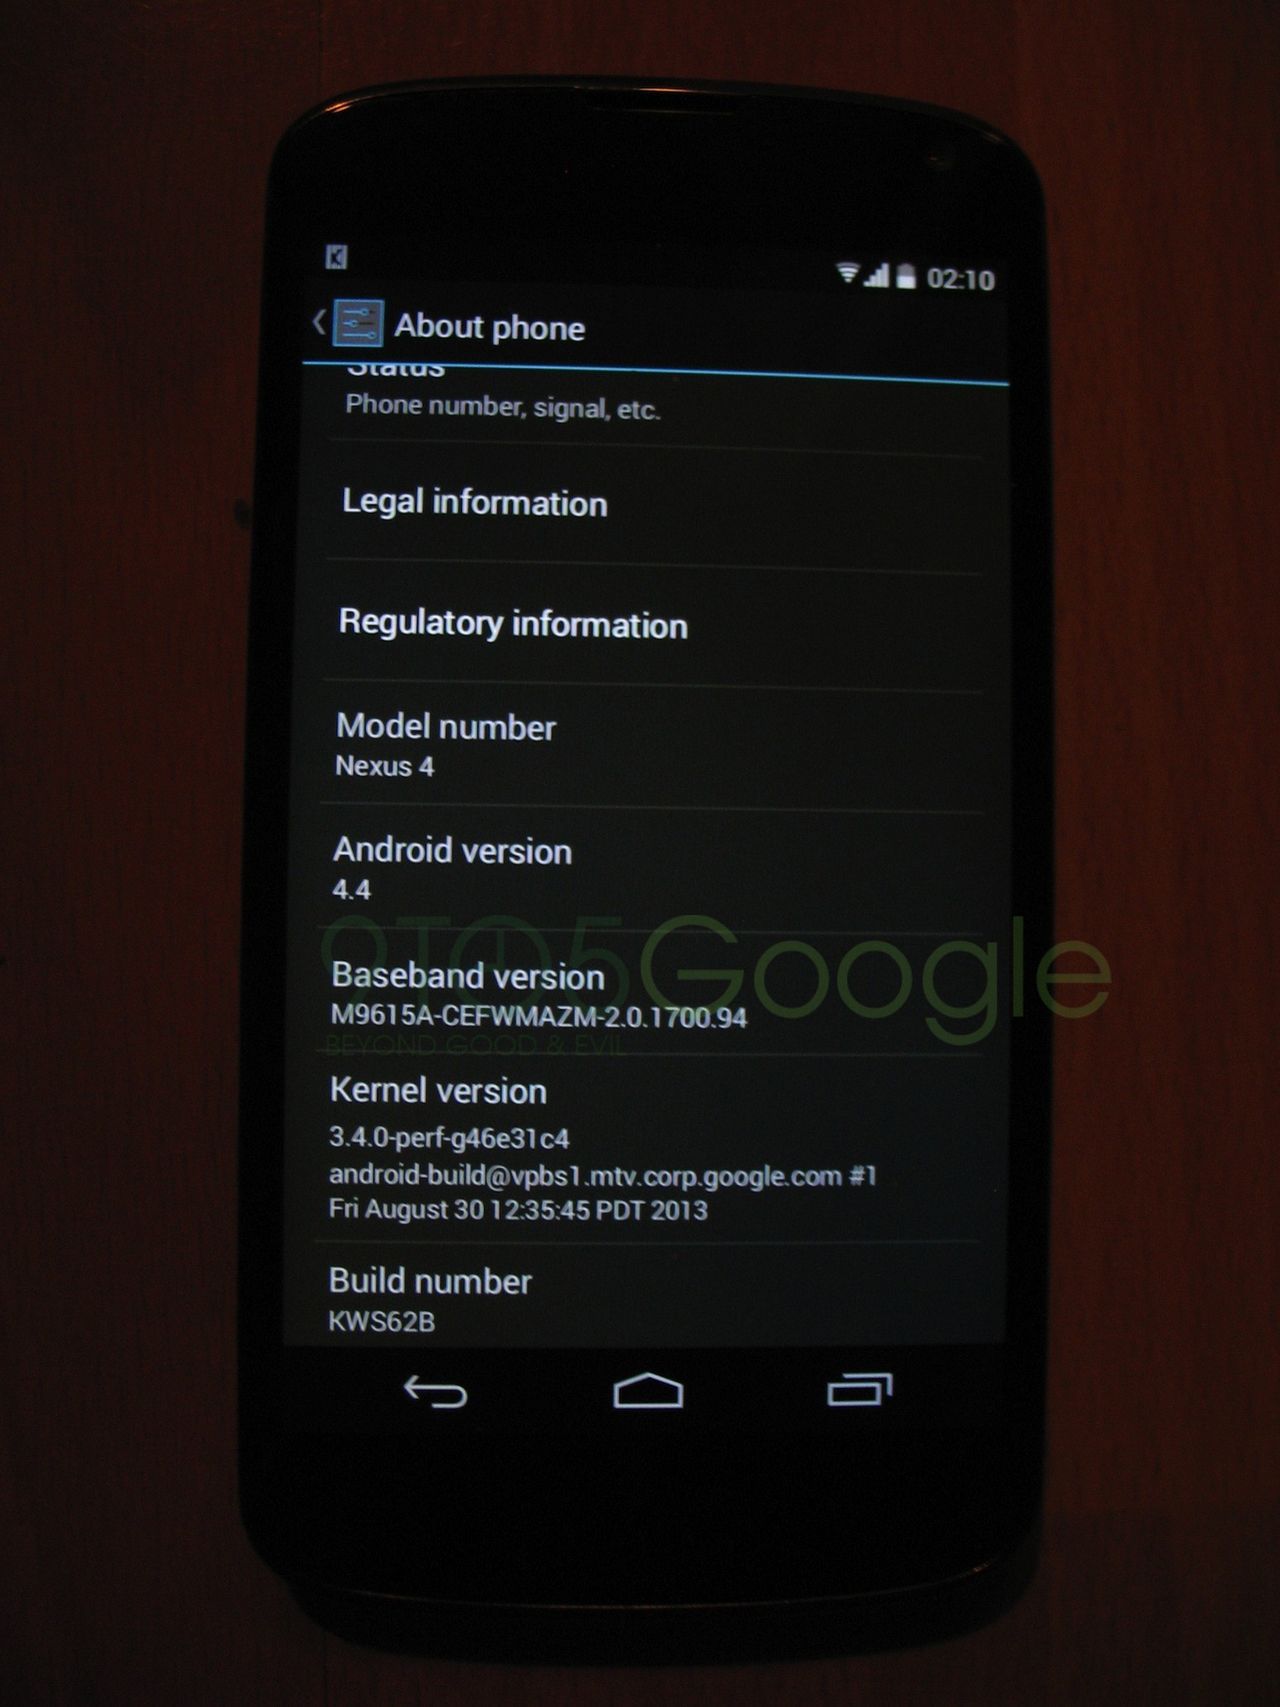 Android 4.4 KitKat (fot. 9to5google.com)